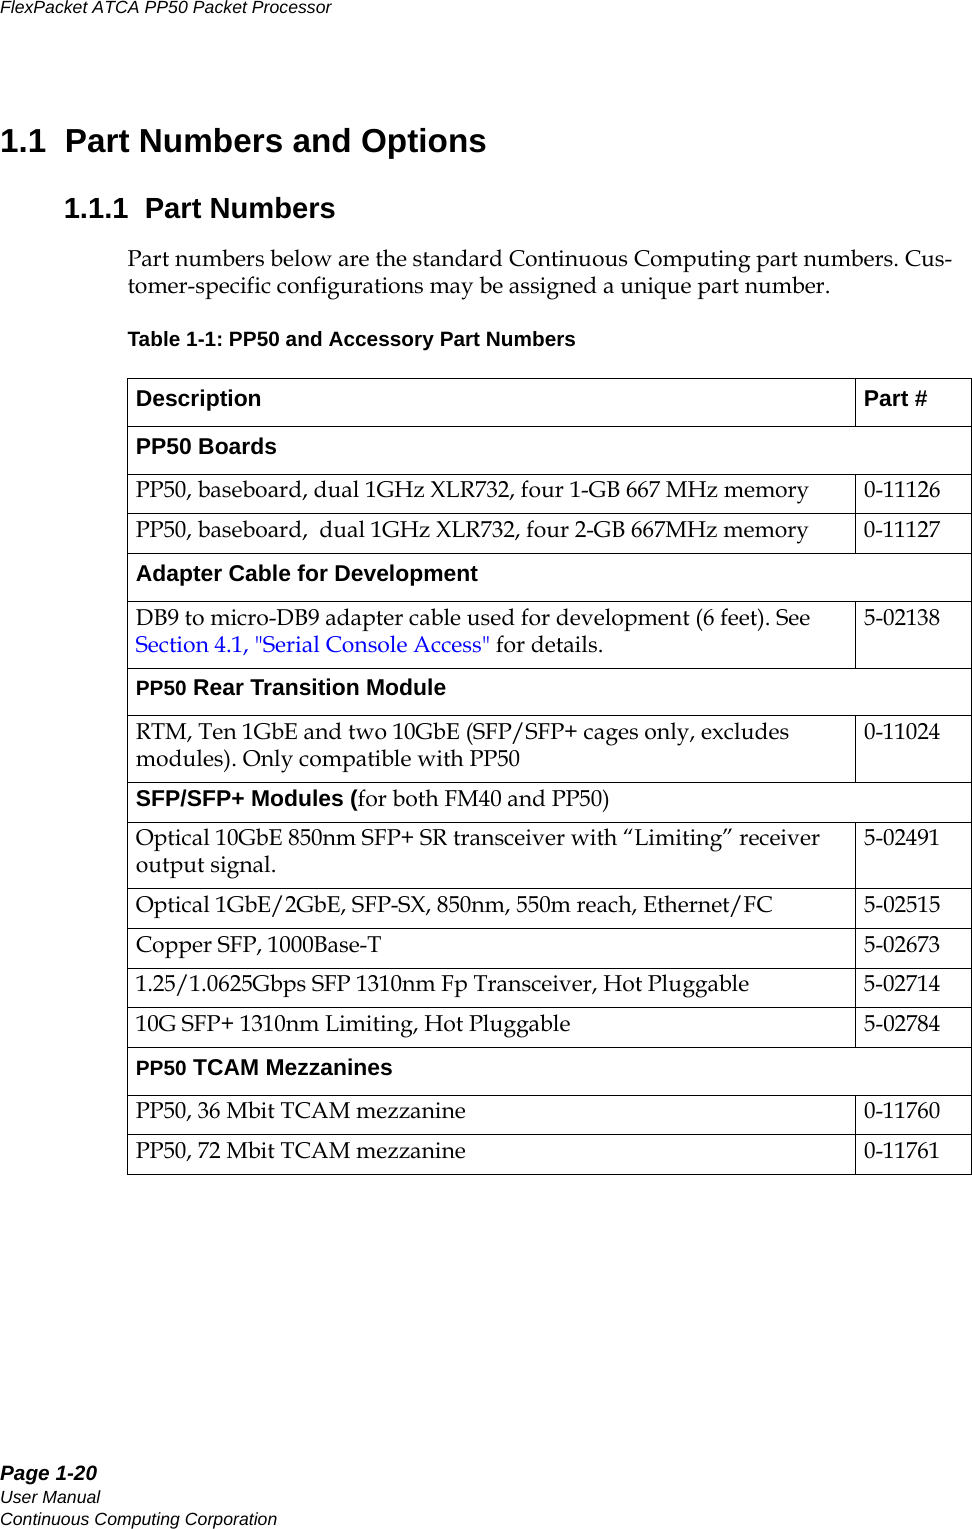 Page 1-20User ManualContinuous Computing CorporationFlexPacket ATCA PP50 Packet Processor     Preliminary1.1  Part Numbers and Options1.1.1  Part NumbersPart numbers below are the standard Continuous Computing part numbers. Cus-tomer-specific configurations may be assigned a unique part number. Table 1-1: PP50 and Accessory Part NumbersDescription Part #PP50 BoardsPP50, baseboard, dual 1GHz XLR732, four 1-GB 667 MHz memory 0-11126PP50, baseboard,  dual 1GHz XLR732, four 2-GB 667MHz memory 0-11127Adapter Cable for DevelopmentDB9 to micro-DB9 adapter cable used for development (6 feet). See Section4.1, &quot;Serial Console Access&quot; for details.5-02138PP50 Rear Transition ModuleRTM, Ten 1GbE and two 10GbE (SFP/SFP+ cages only, excludes modules). Only compatible with PP500-11024SFP/SFP+ Modules (for both FM40 and PP50)Optical 10GbE 850nm SFP+ SR transceiver with “Limiting” receiver output signal. 5-02491Optical 1GbE/2GbE, SFP-SX, 850nm, 550m reach, Ethernet/FC 5-02515Copper SFP, 1000Base-T 5-026731.25/1.0625Gbps SFP 1310nm Fp Transceiver, Hot Pluggable 5-0271410G SFP+ 1310nm Limiting, Hot Pluggable 5-02784PP50 TCAM MezzaninesPP50, 36 Mbit TCAM mezzanine 0-11760PP50, 72 Mbit TCAM mezzanine 0-11761